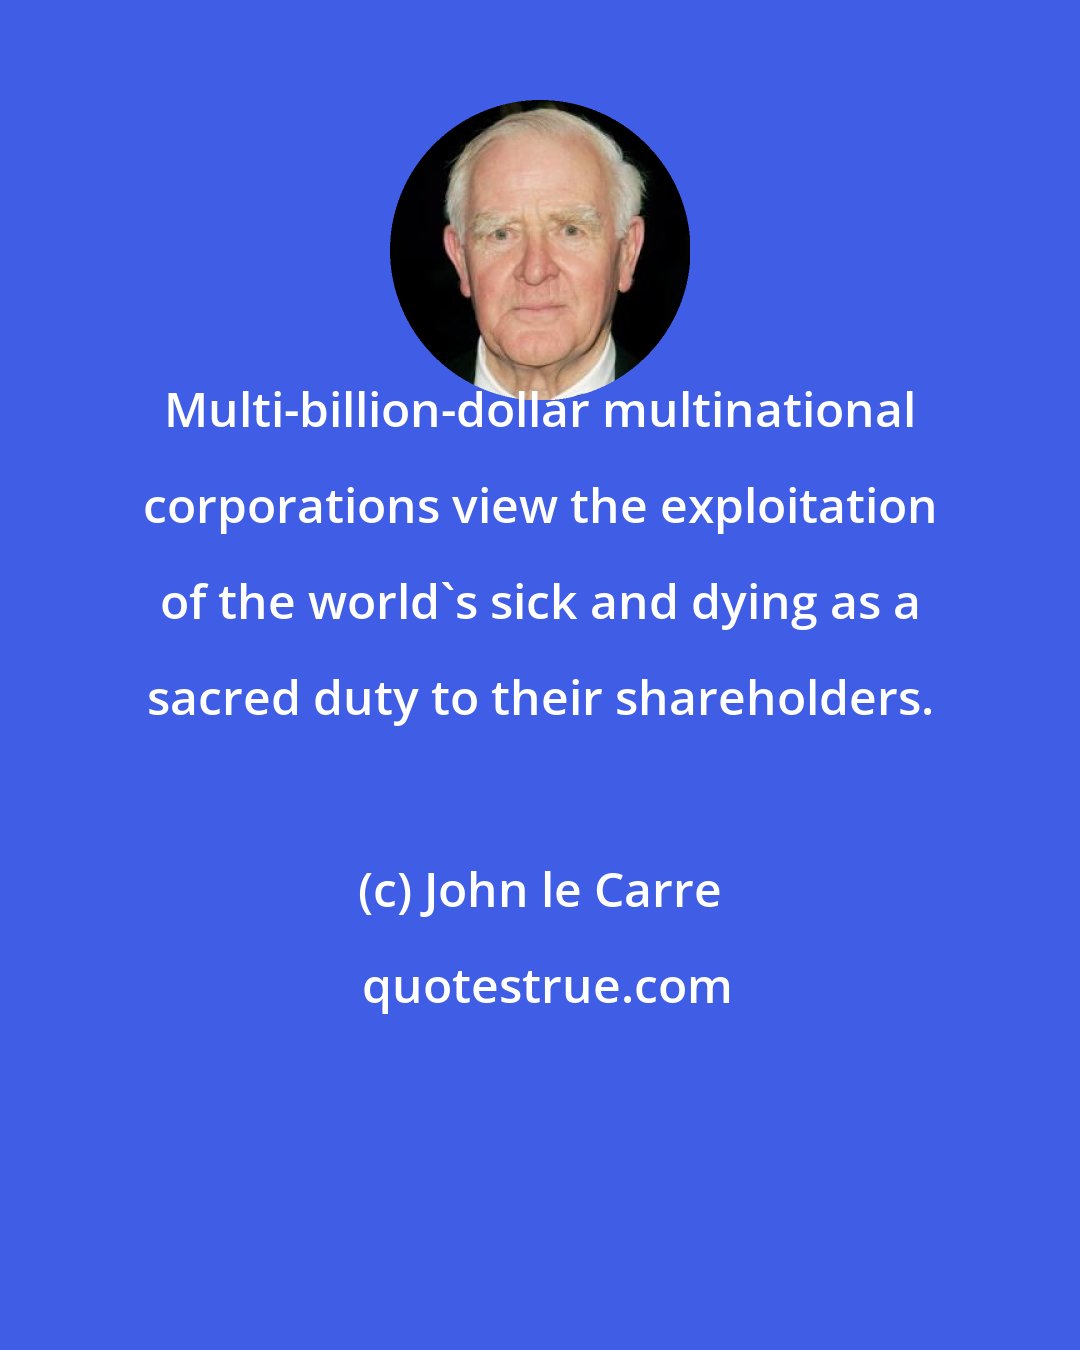 John le Carre: Multi-billion-dollar multinational corporations view the exploitation of the world's sick and dying as a sacred duty to their shareholders.